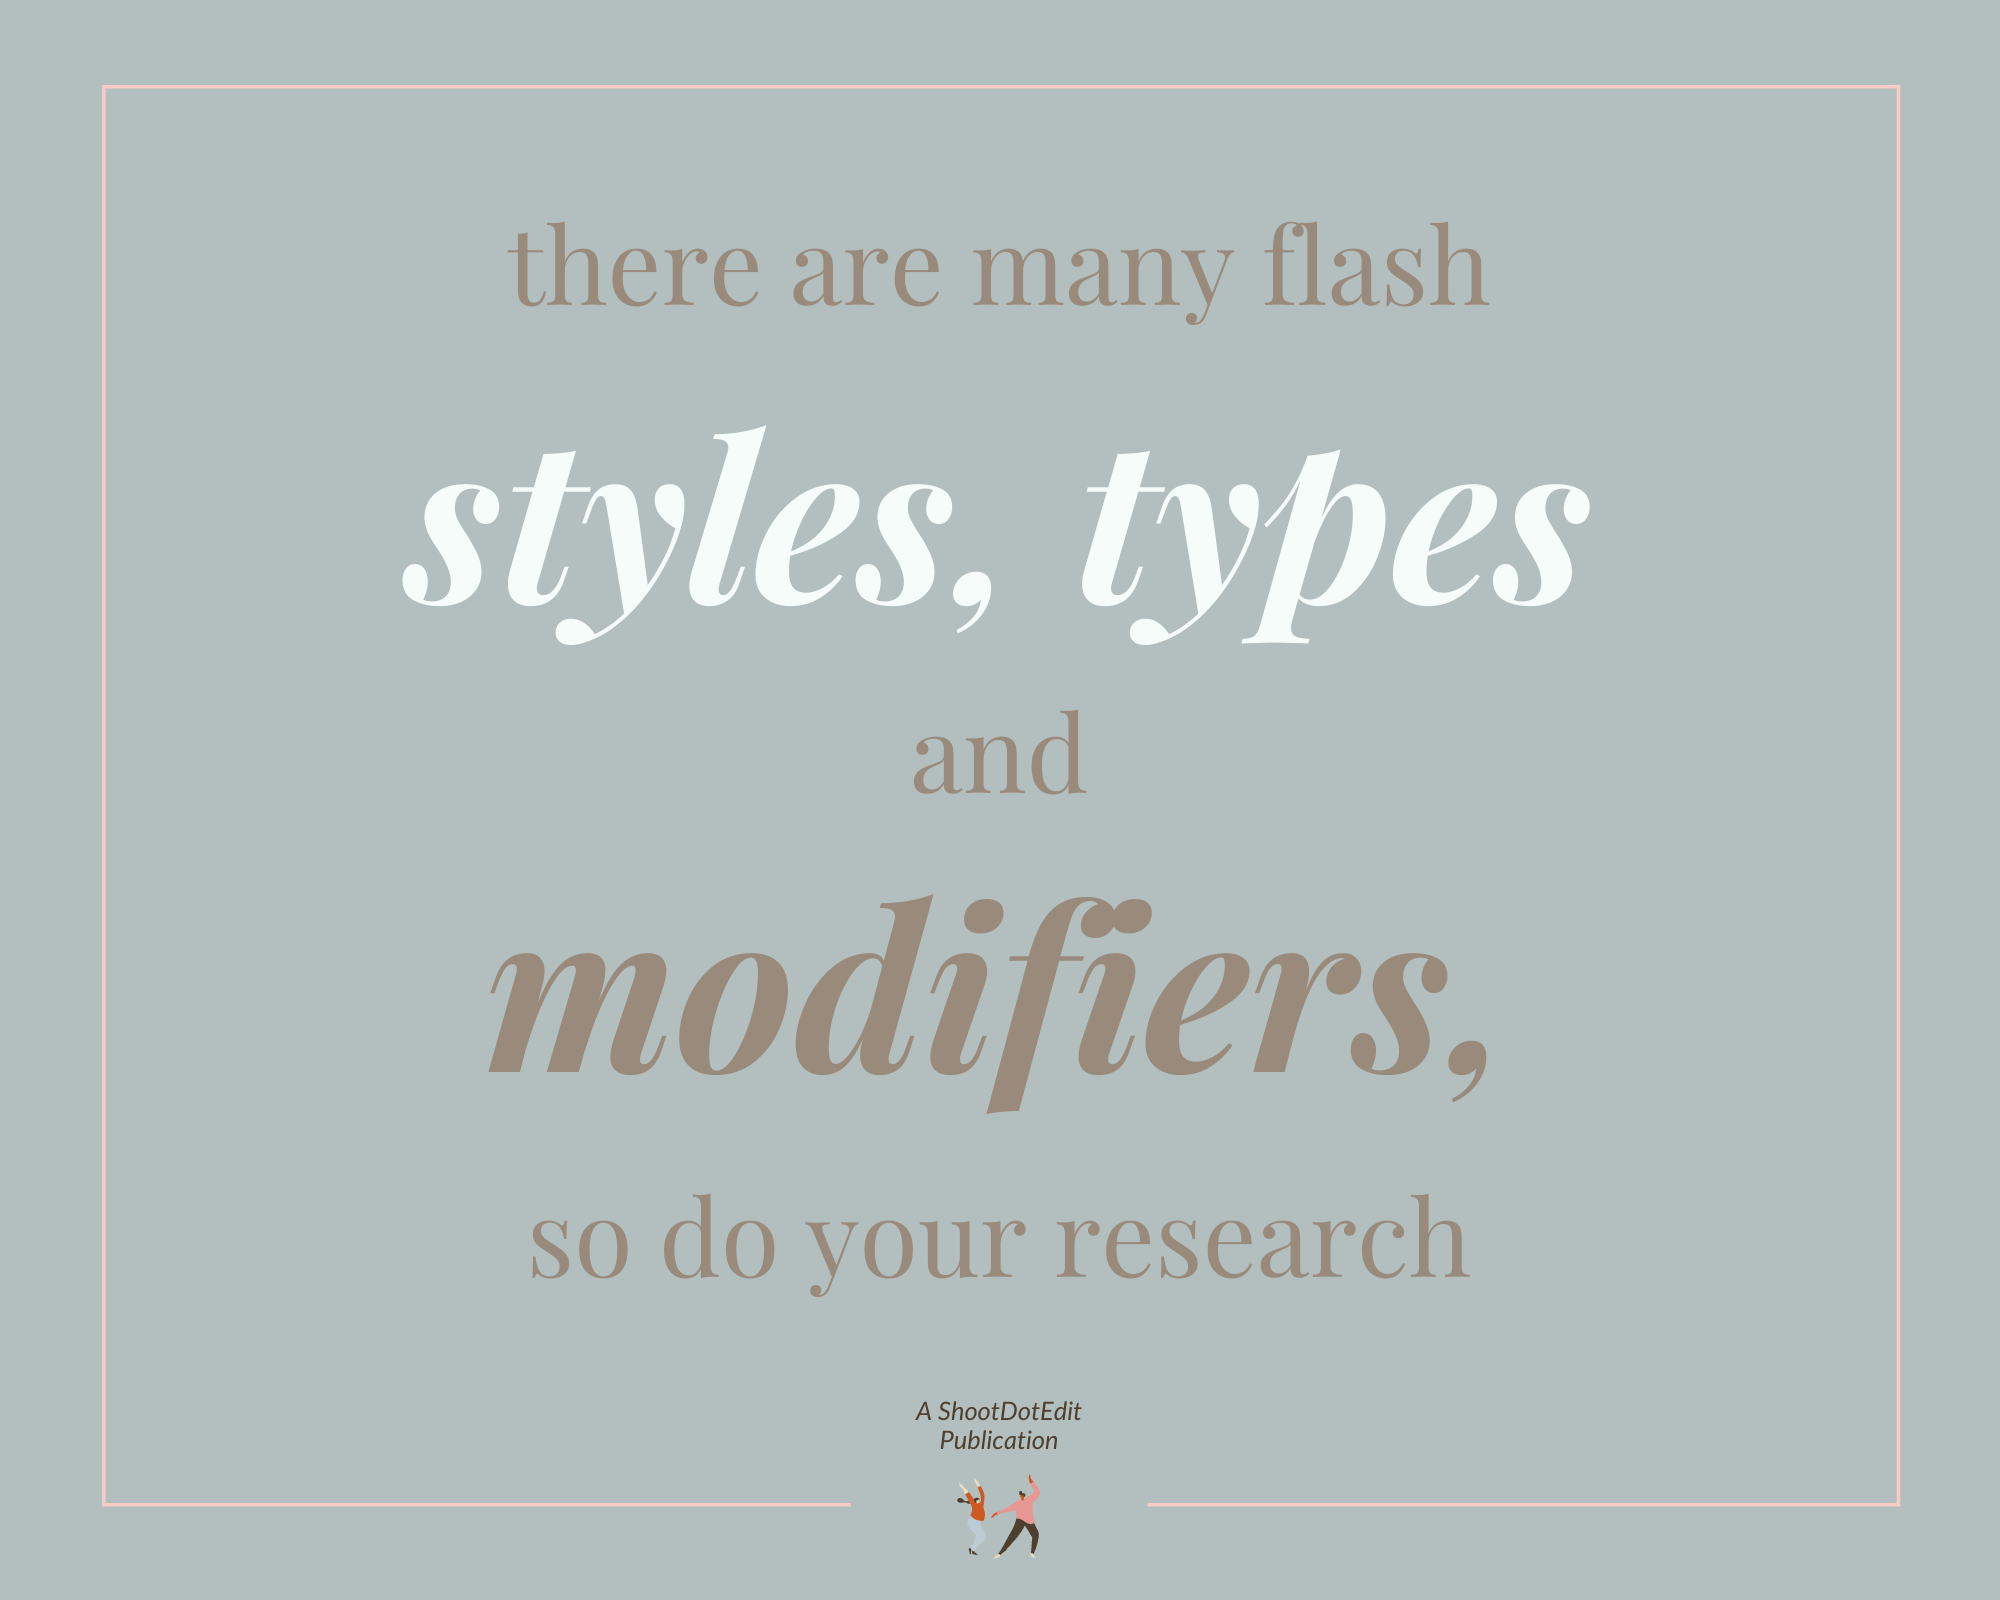 Infographic stating there are many flash styles, types and modifiers, so do your research